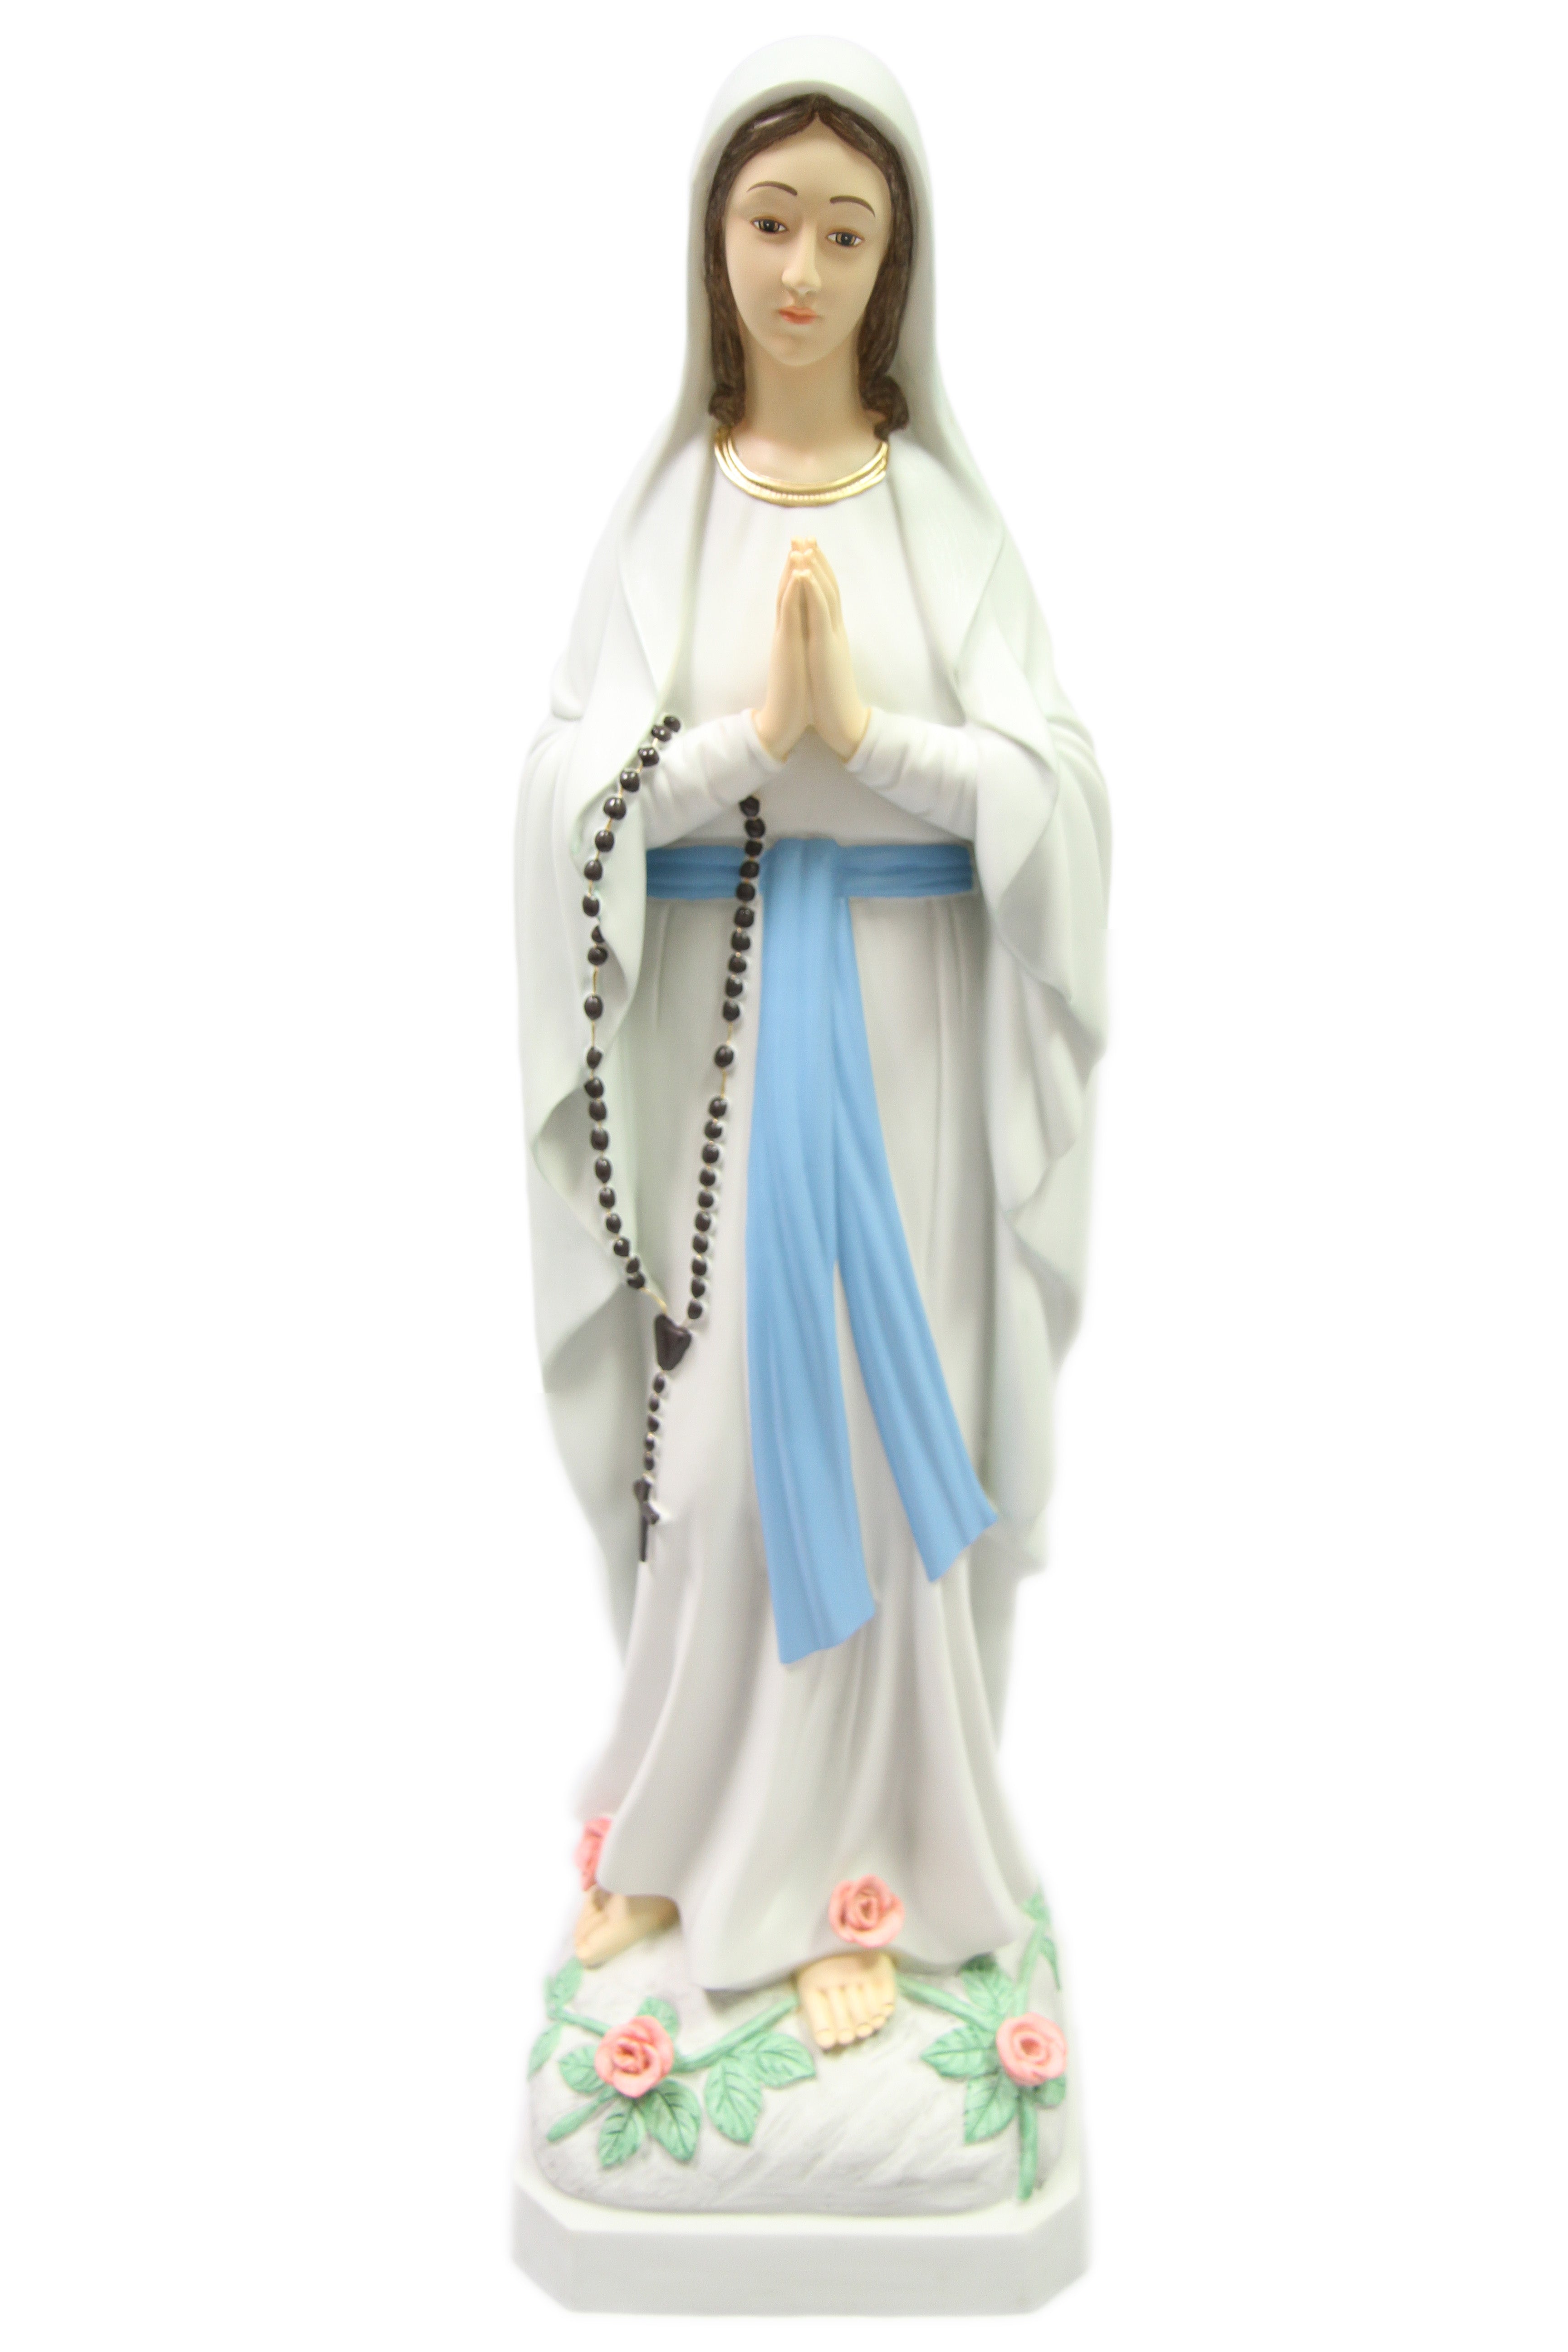 32 Inch Our Lady of Lourdes Catholic Statue Sculpture Vittoria Collection Made in Italy